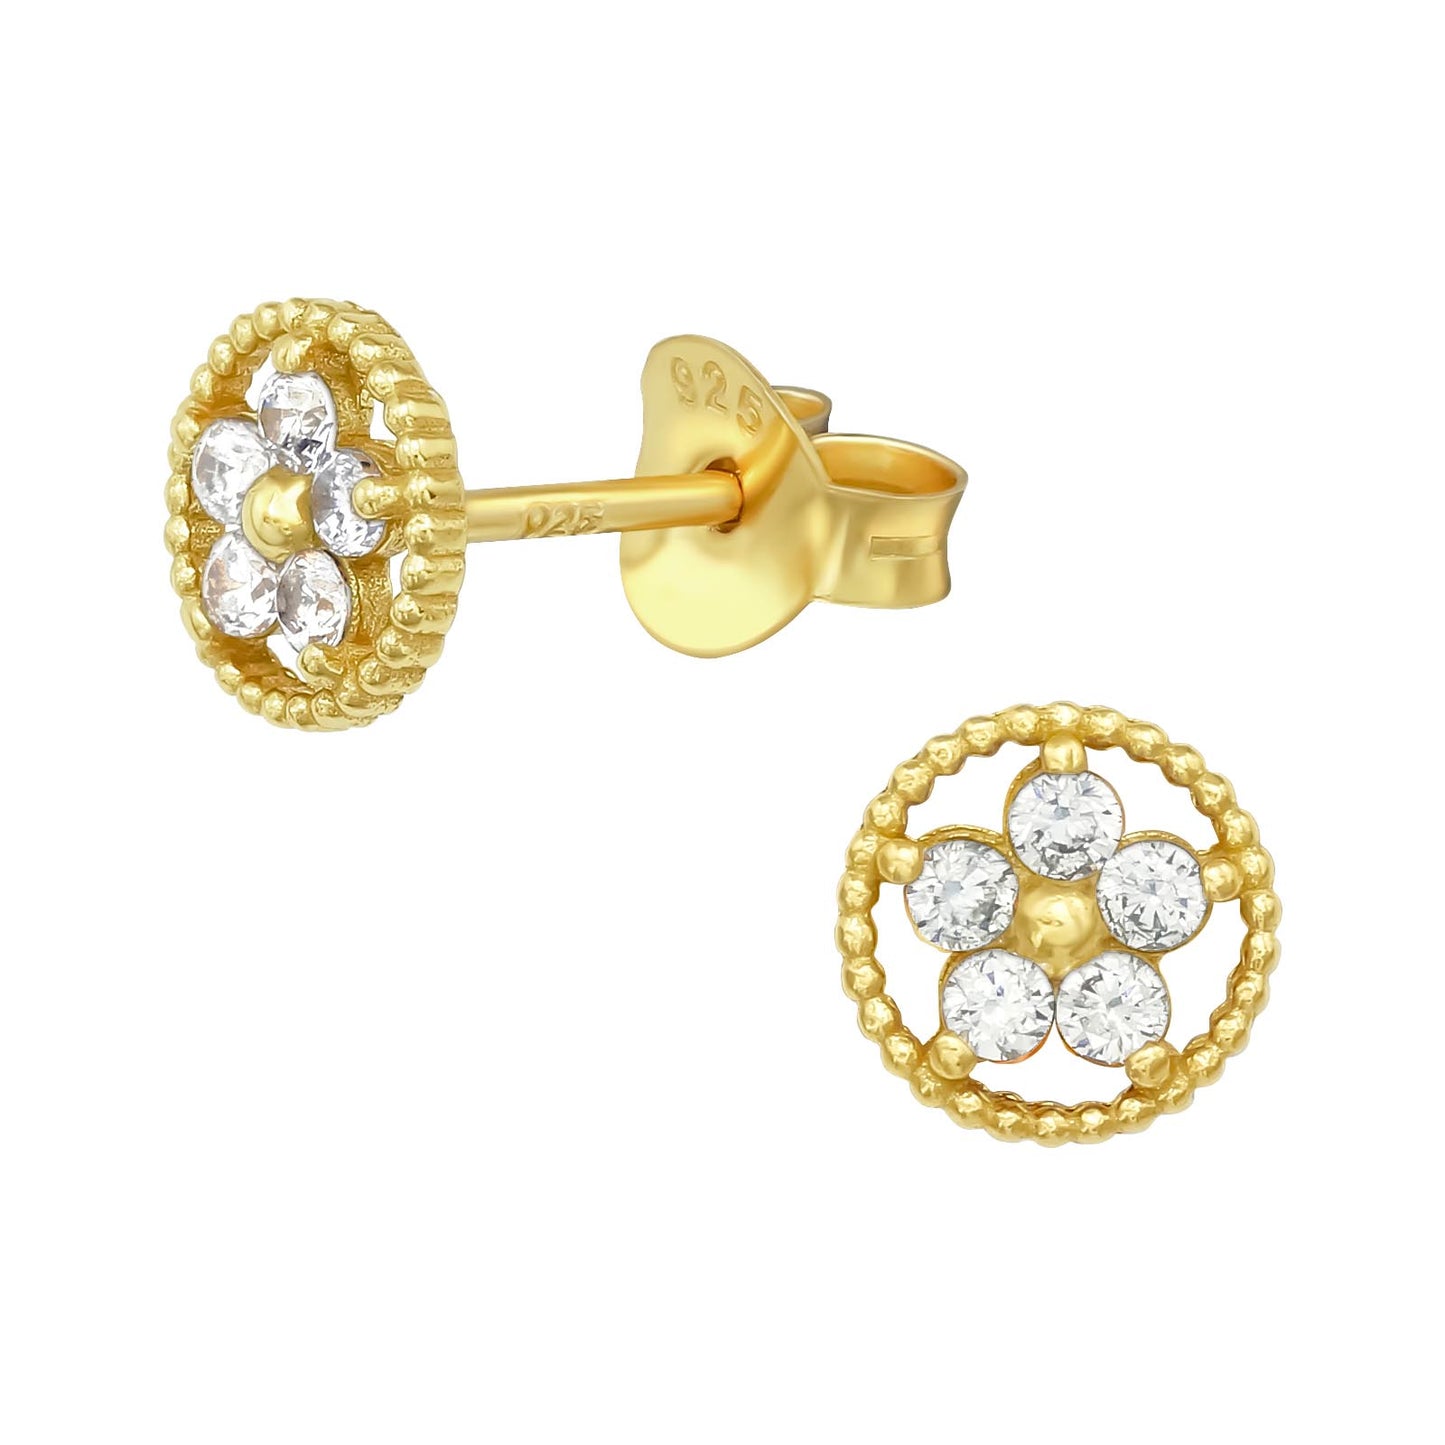 "GOLD FLOWER GLEAM" - Real Gold Plated Cubic Zirconia Flower Studs